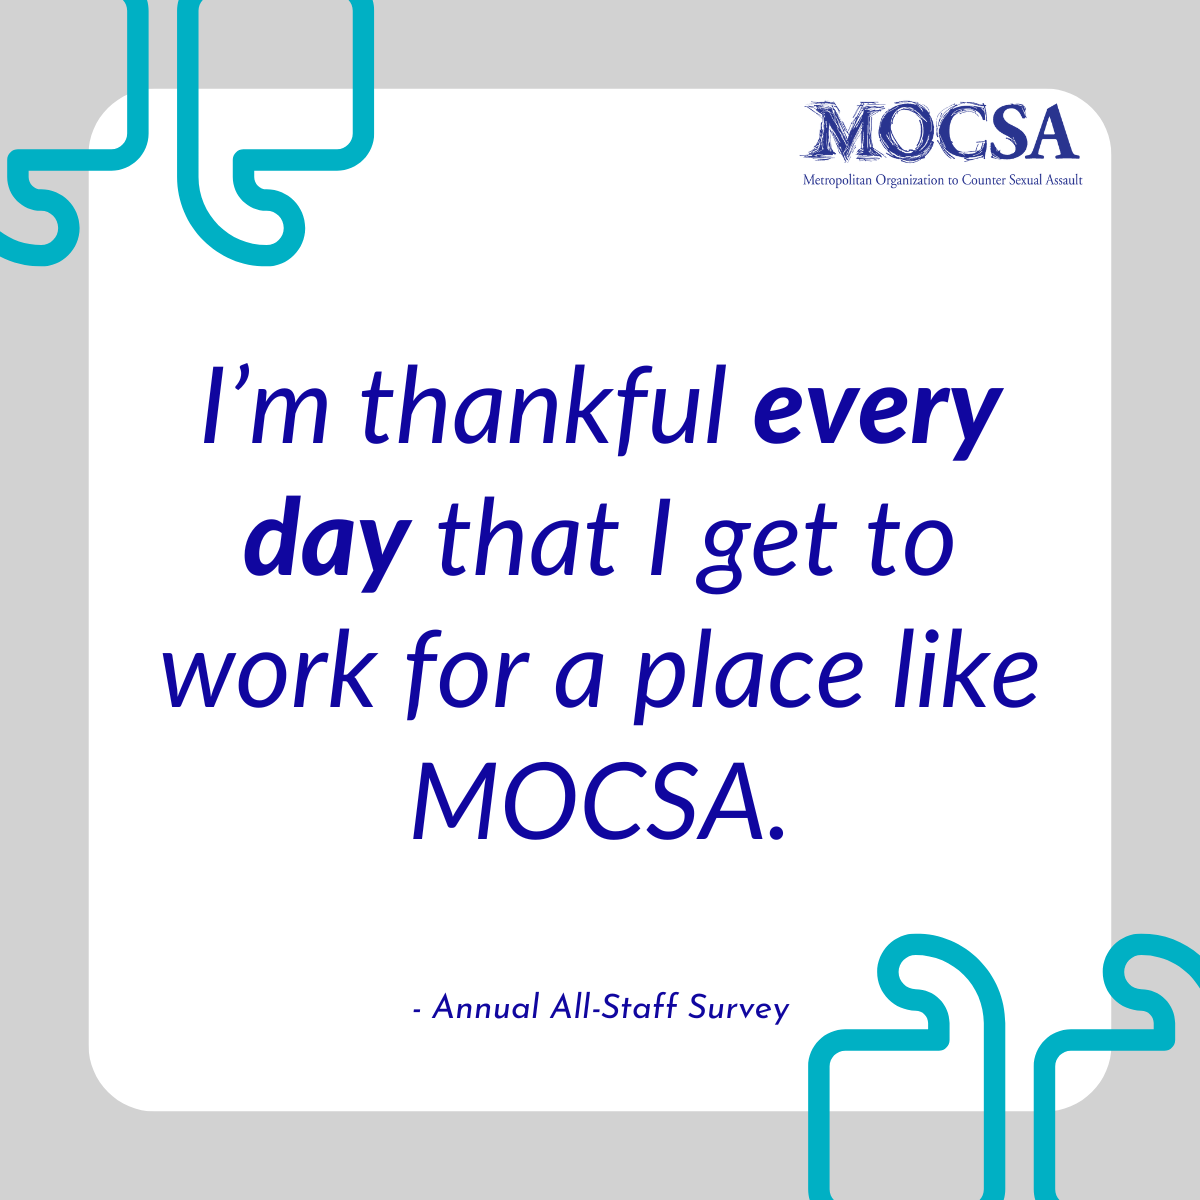 Blue text on white background that reads: I’m thankful every day that I get to work for a place like MOCSA.